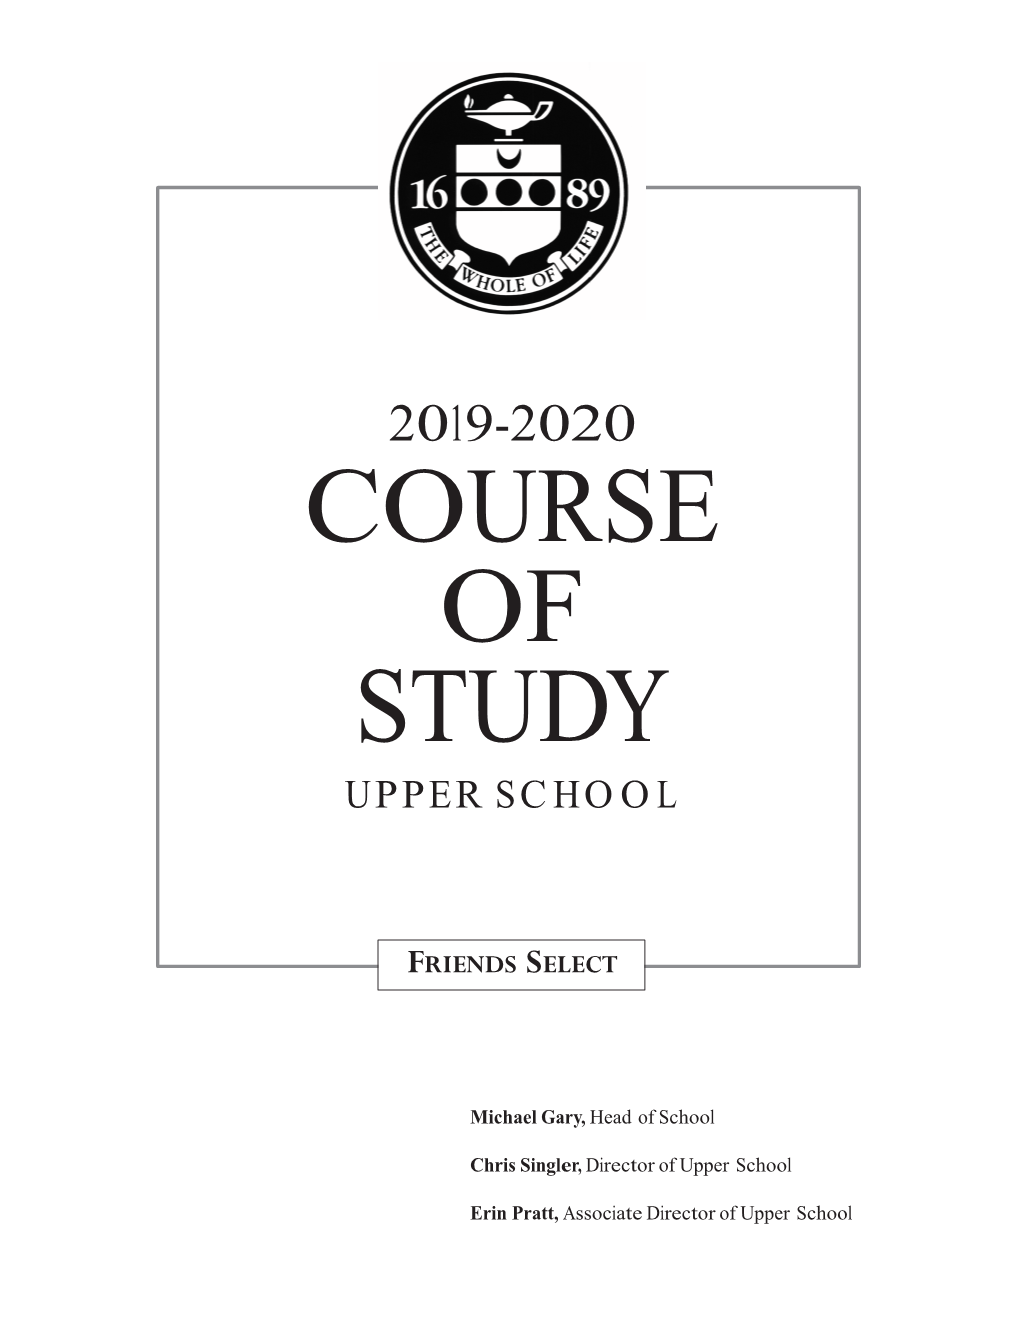 2019-2020 Course of Study